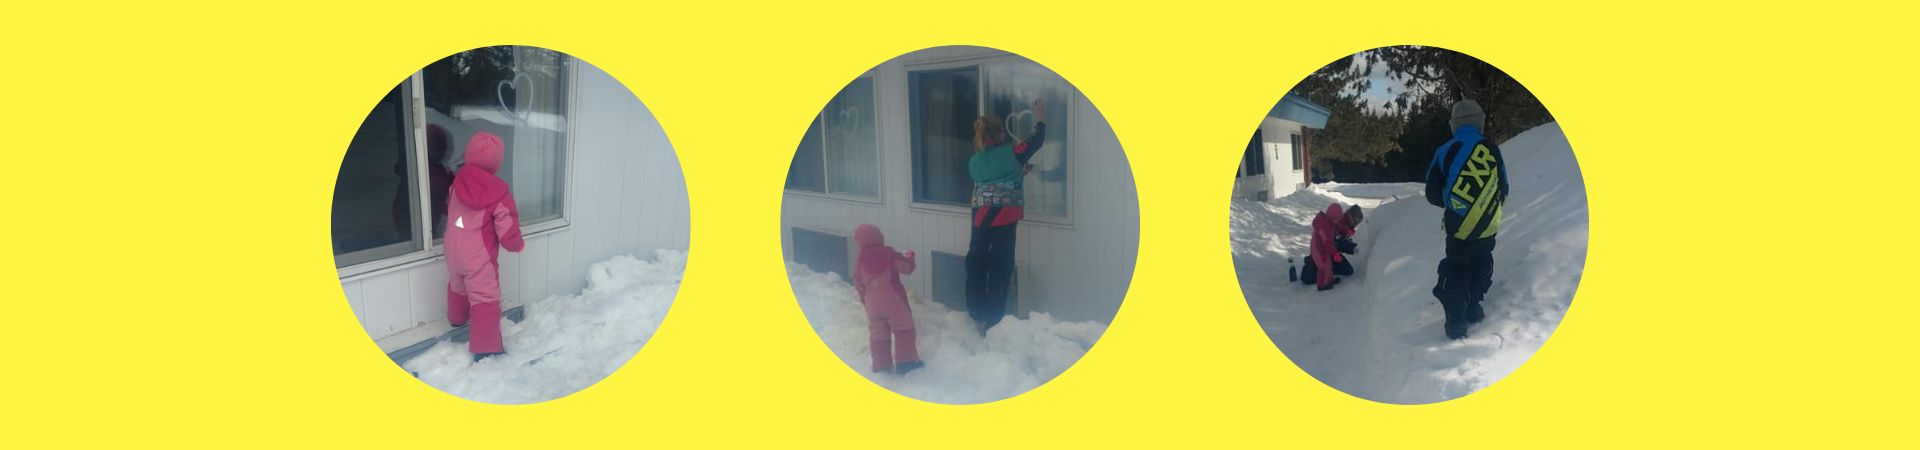  Three images showing payton and others making art on windows and in the snow 